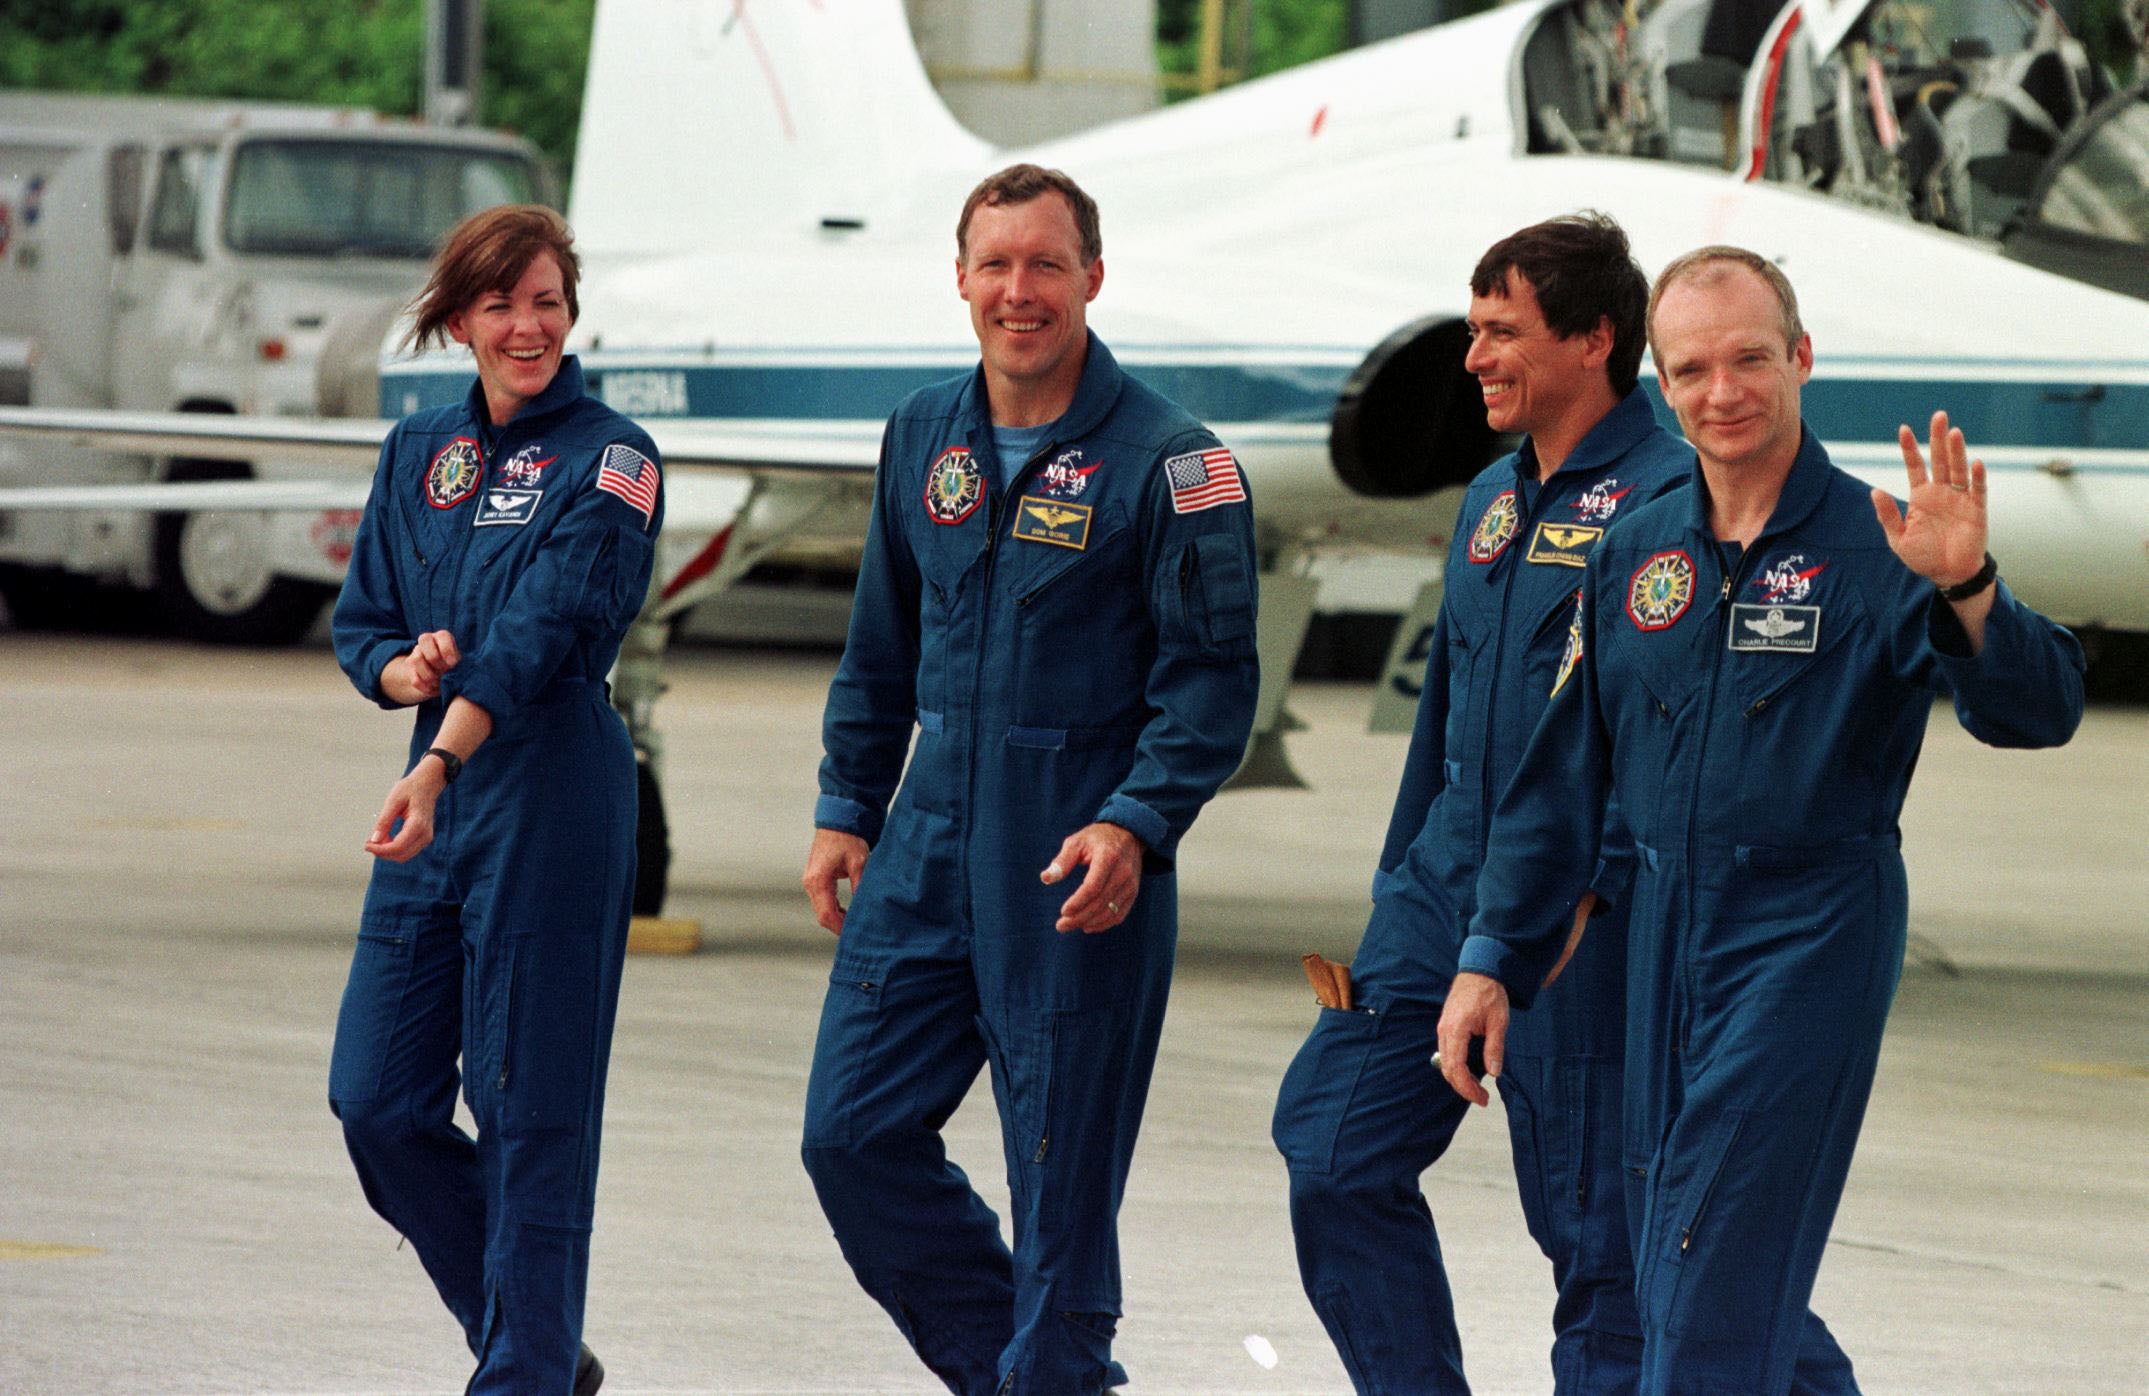 Crew of the space shuttle Discovery (with Janet Kavandi on left) walk away from a shuttle training aircraft at the Kennedy Space Centre